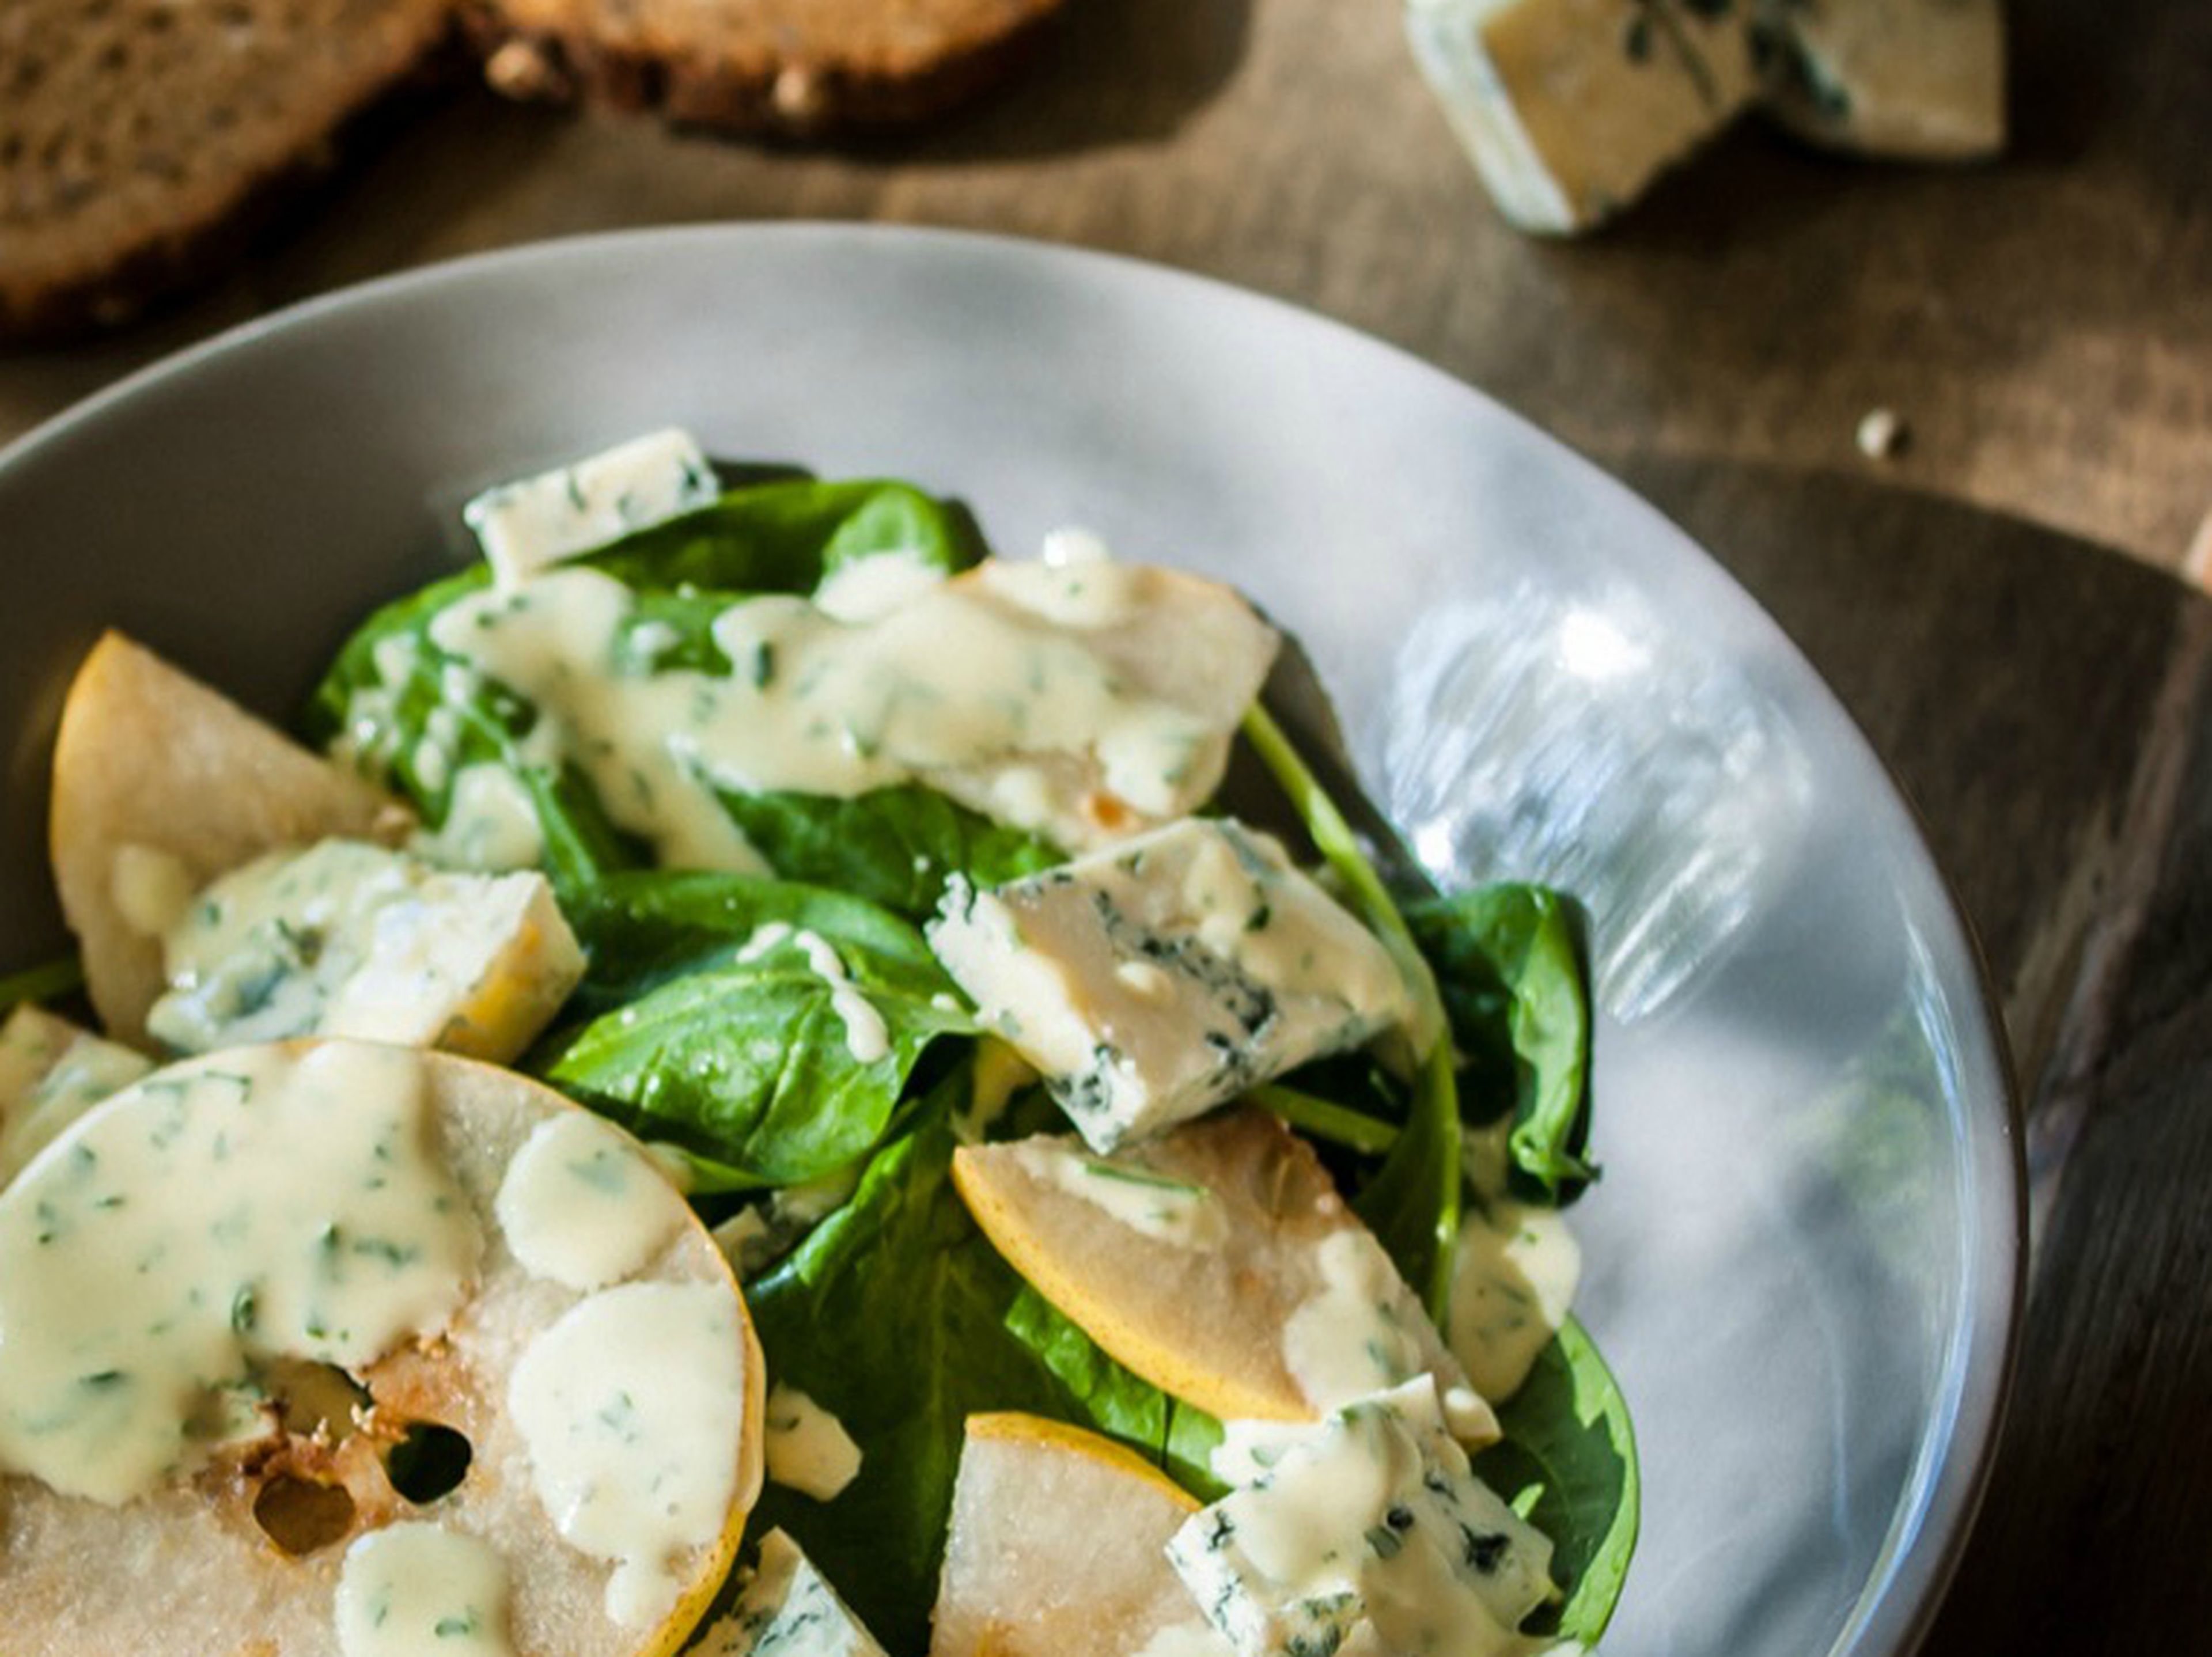 Simple spinach salad with blue cheese and pear